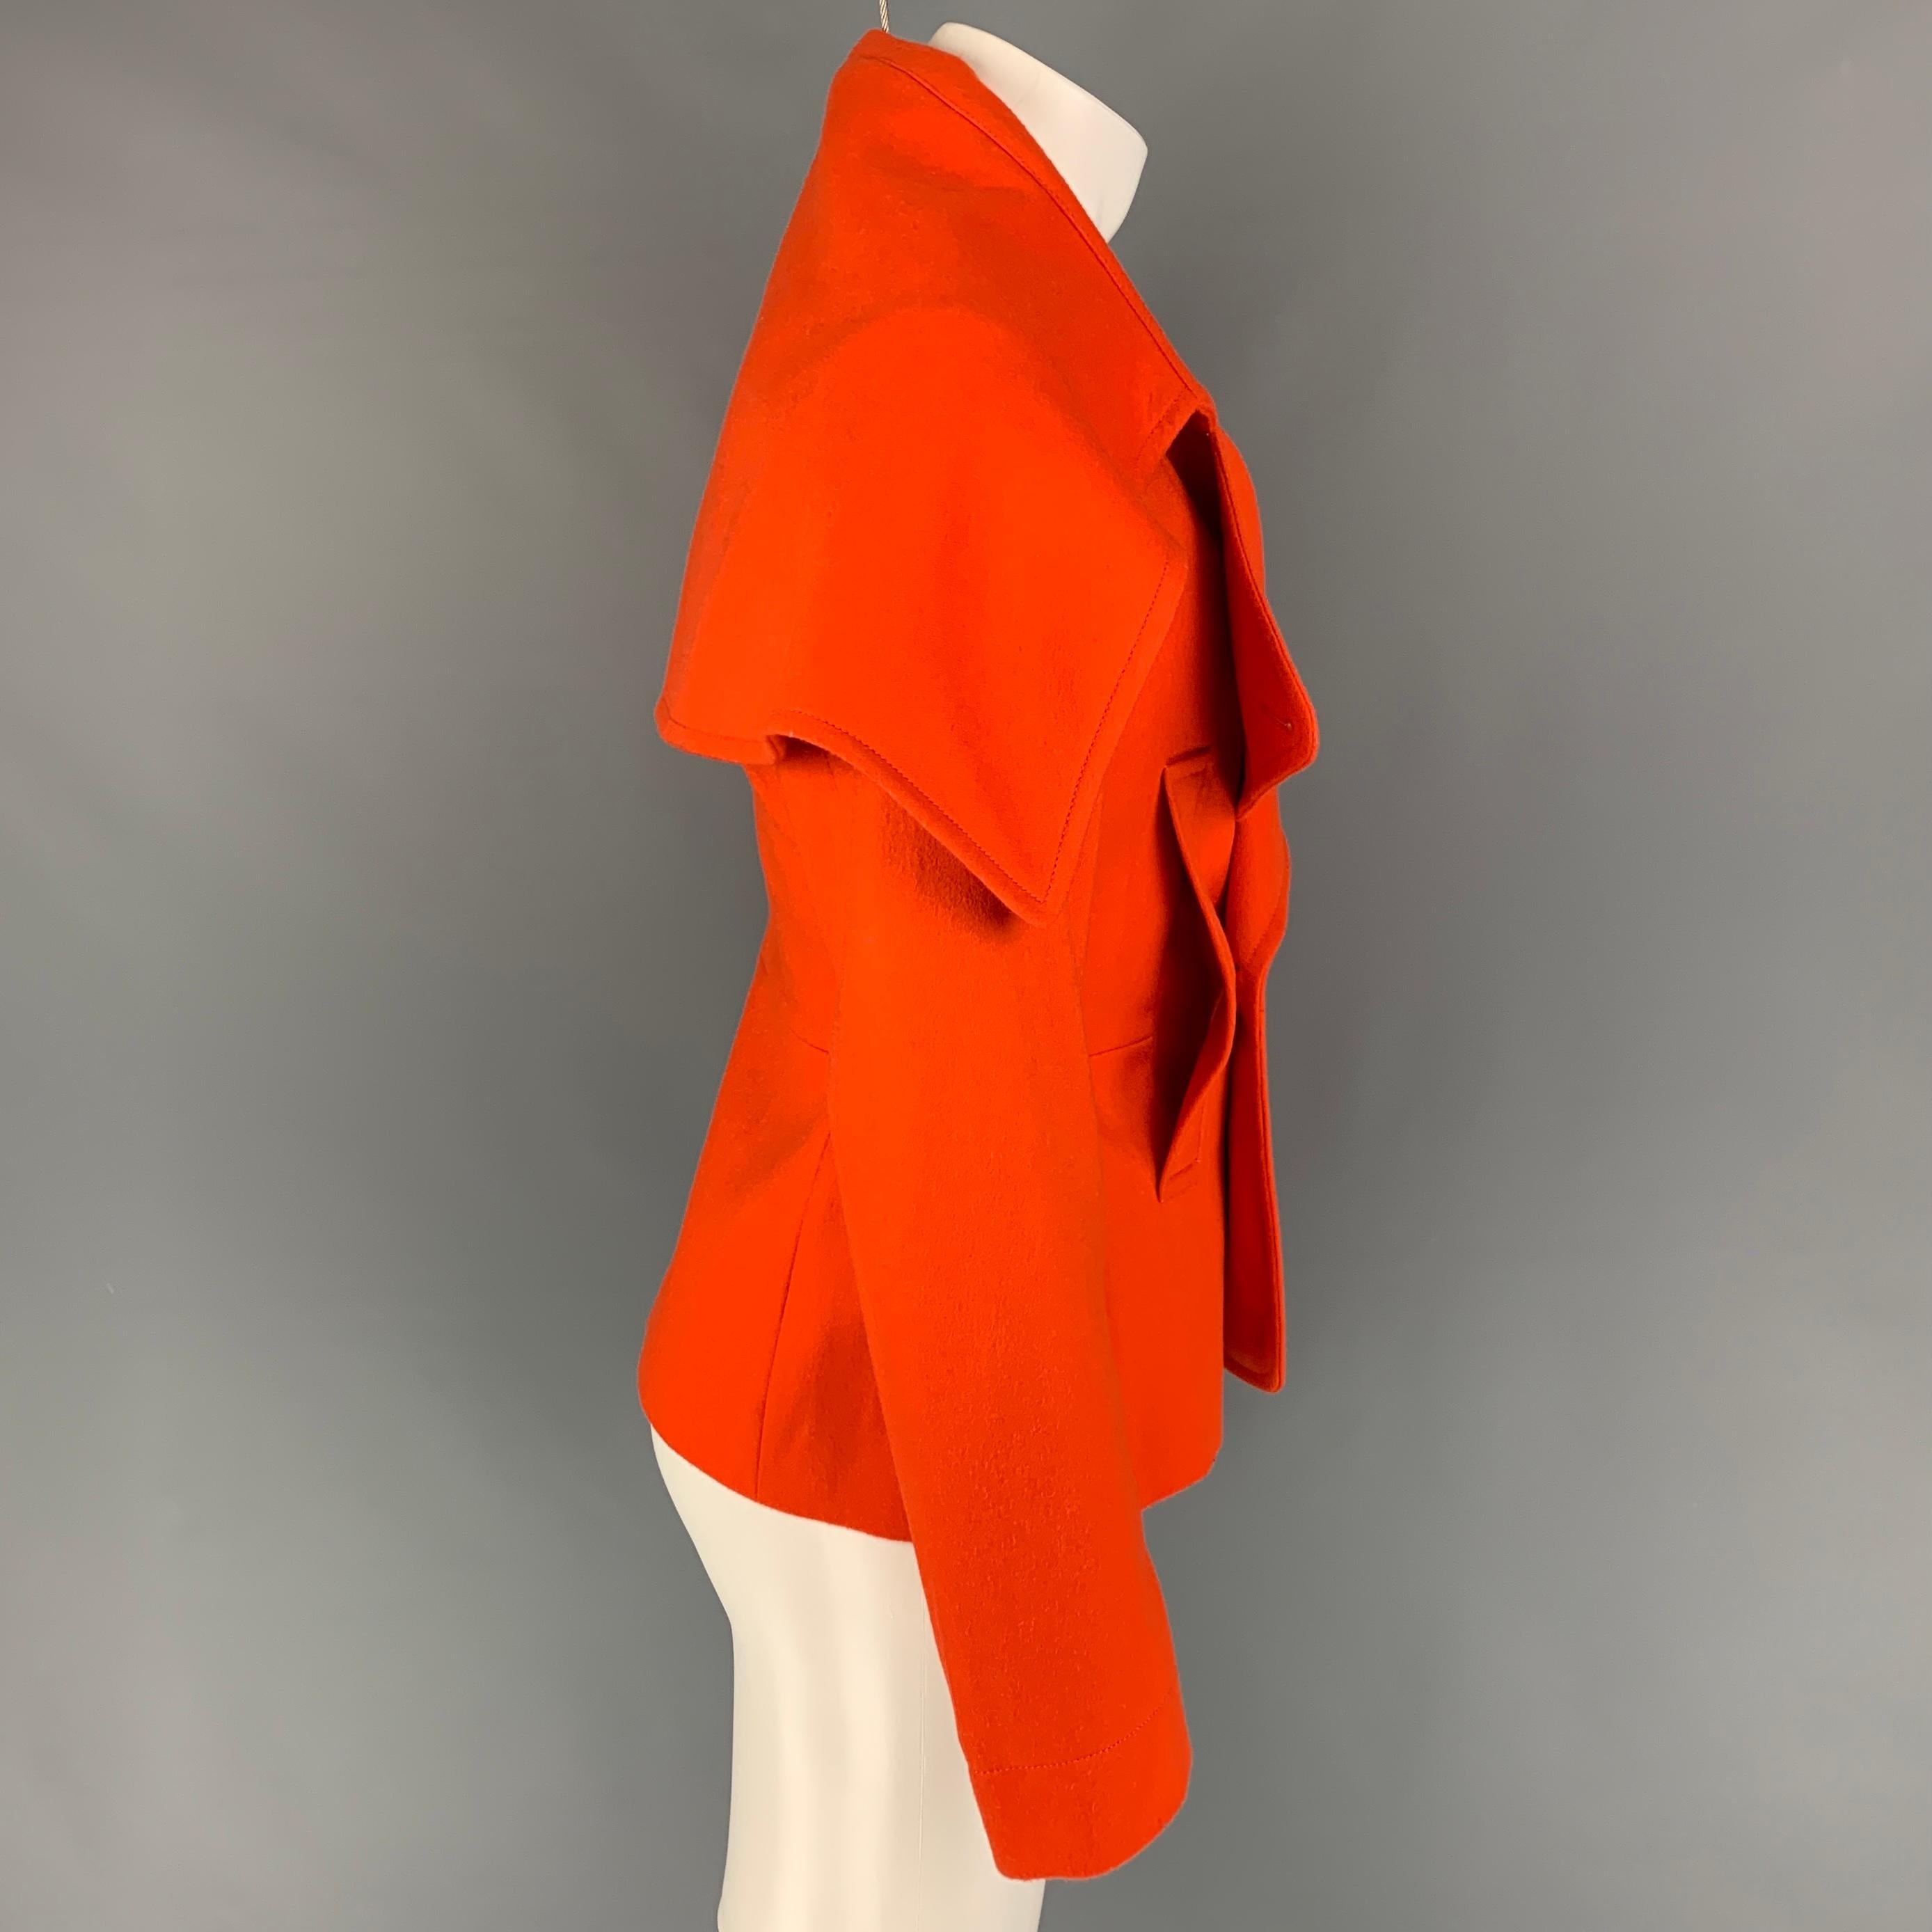 WALTER VAN BEIRENDONCK jacket comes in a orange wool with a full liner featuring a large lapel design, front pockets, and a double breasted closure. 

New With Tags. 
Marked: 46

Measurements:

Shoulder: 16 in.
Chest: 36 in.
Sleeve: 26.5 in.
Length: